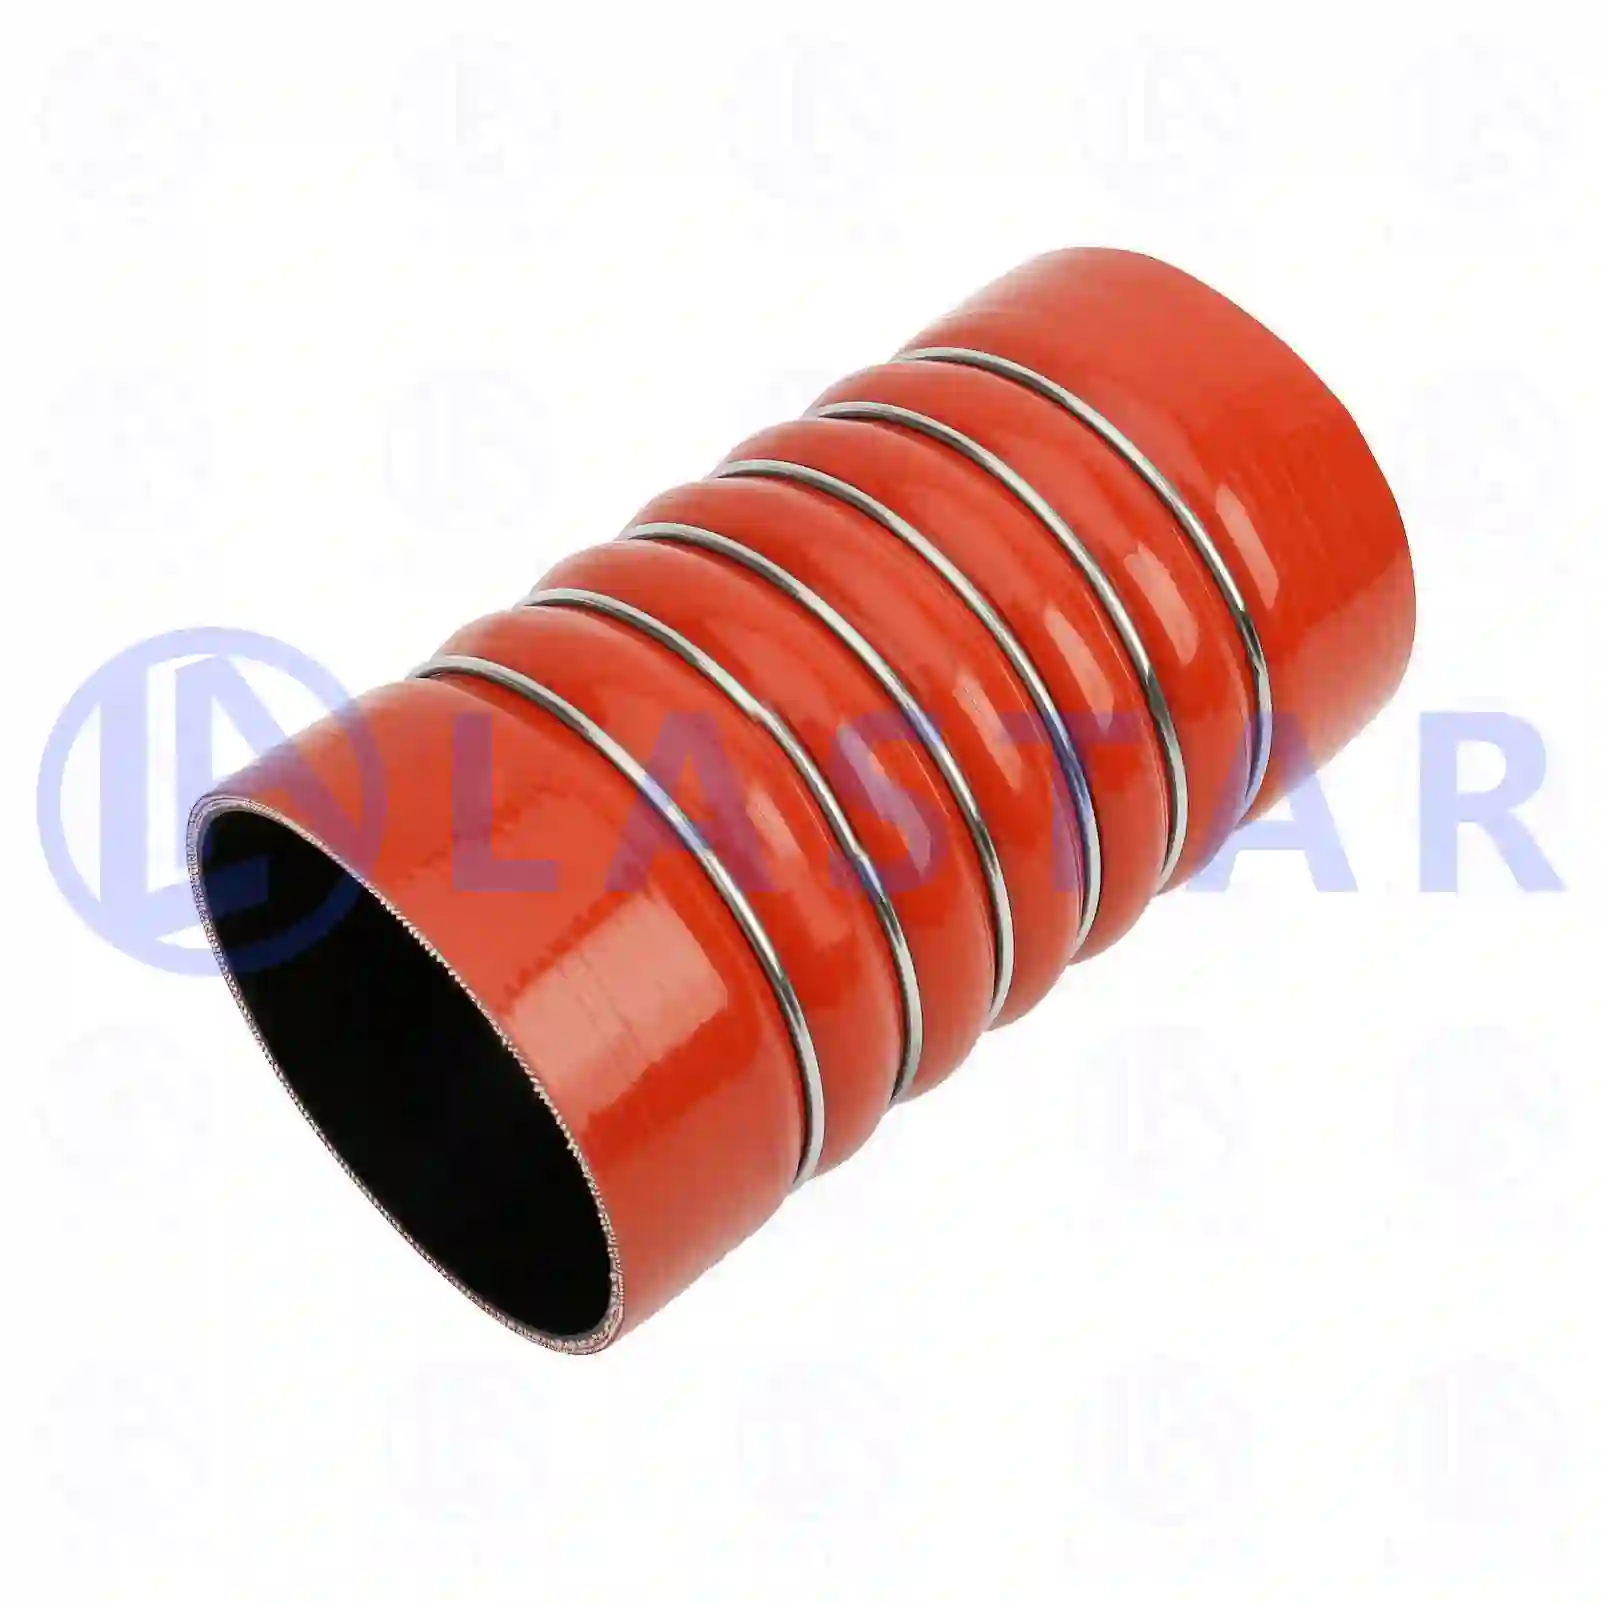 Charge air hose, 77708259, 0020940882, 0020945582, 0020945782, 0020946682, 0030940982, ZG00300-0008 ||  77708259 Lastar Spare Part | Truck Spare Parts, Auotomotive Spare Parts Charge air hose, 77708259, 0020940882, 0020945582, 0020945782, 0020946682, 0030940982, ZG00300-0008 ||  77708259 Lastar Spare Part | Truck Spare Parts, Auotomotive Spare Parts